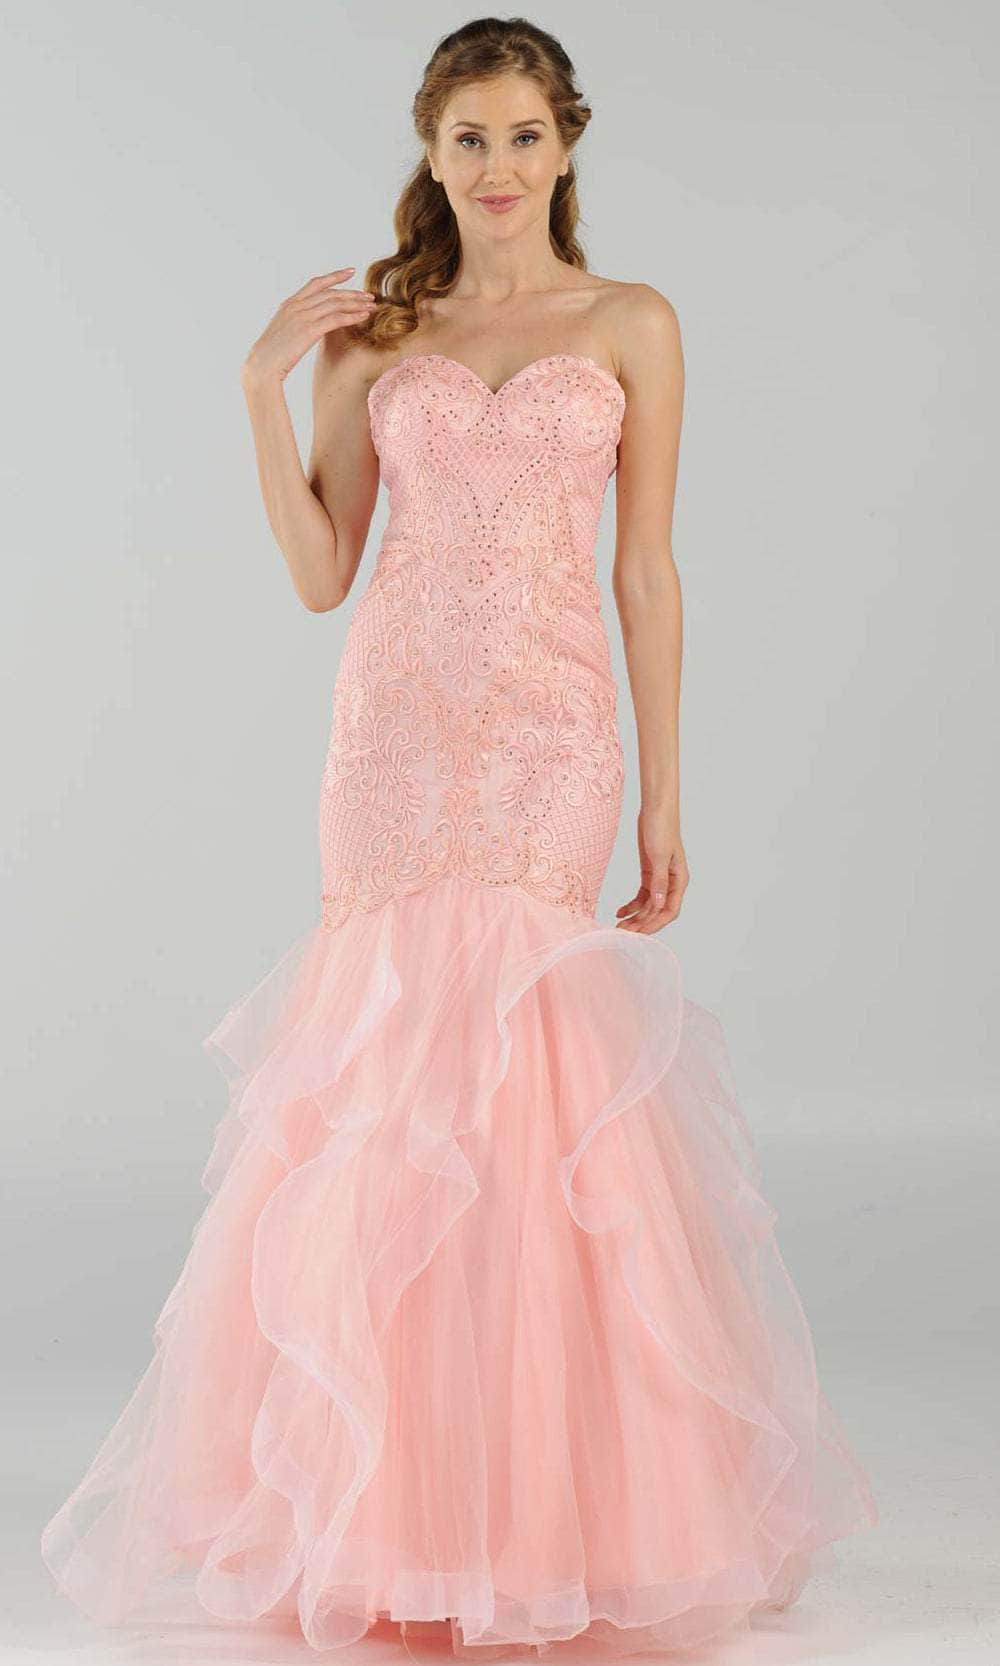 Image of Poly USA 8198 - Sweetheart Tiered Mermaid Prom Dress